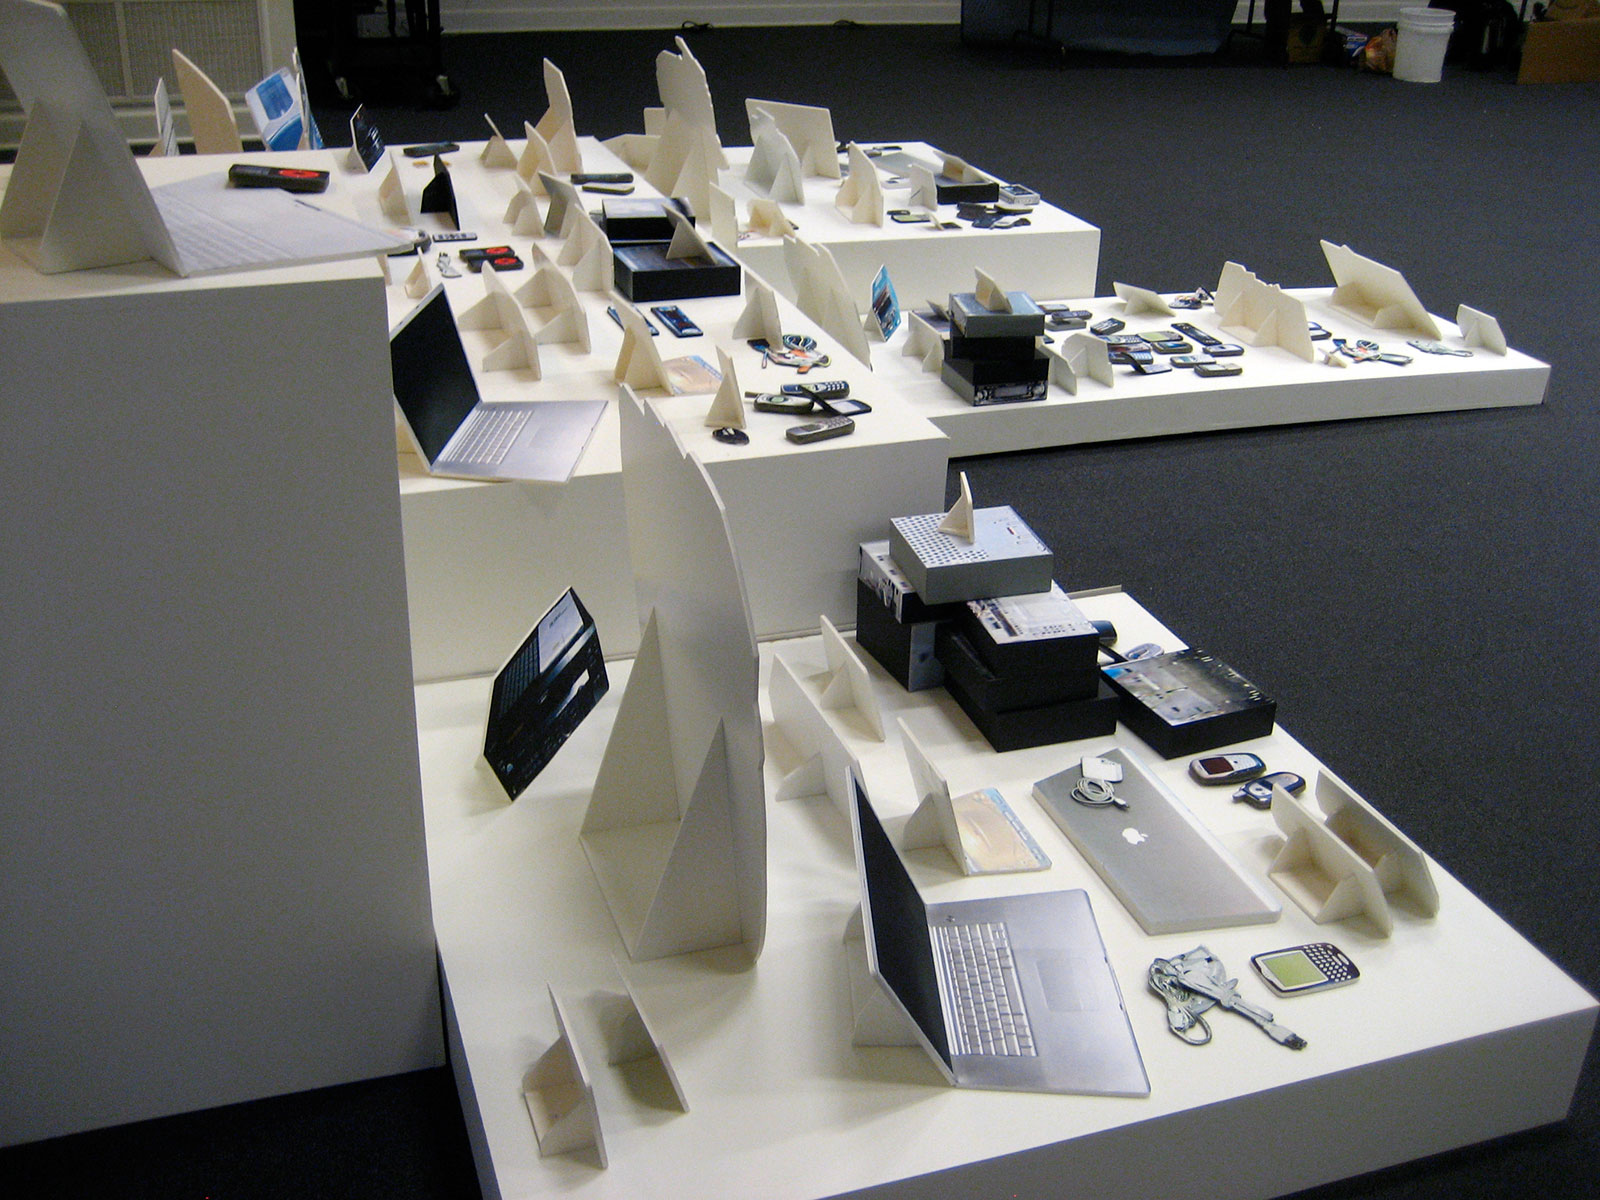 installation of prints of electronic devices